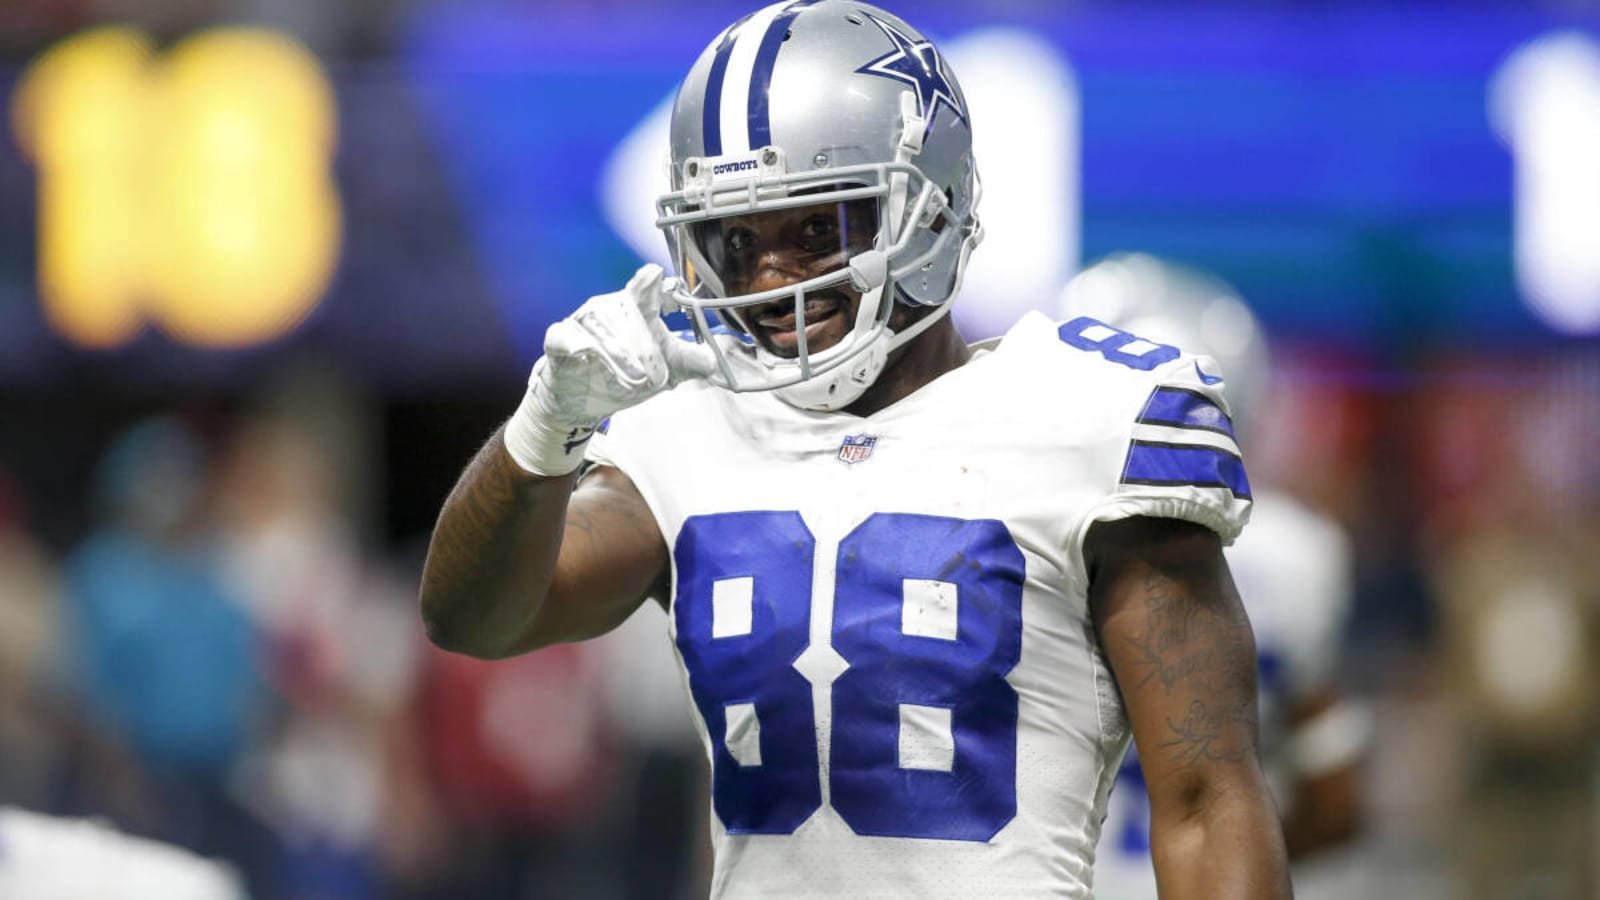 Bryant’s Bet: Dez Cashes in on 13-Leg Basketball Parlay